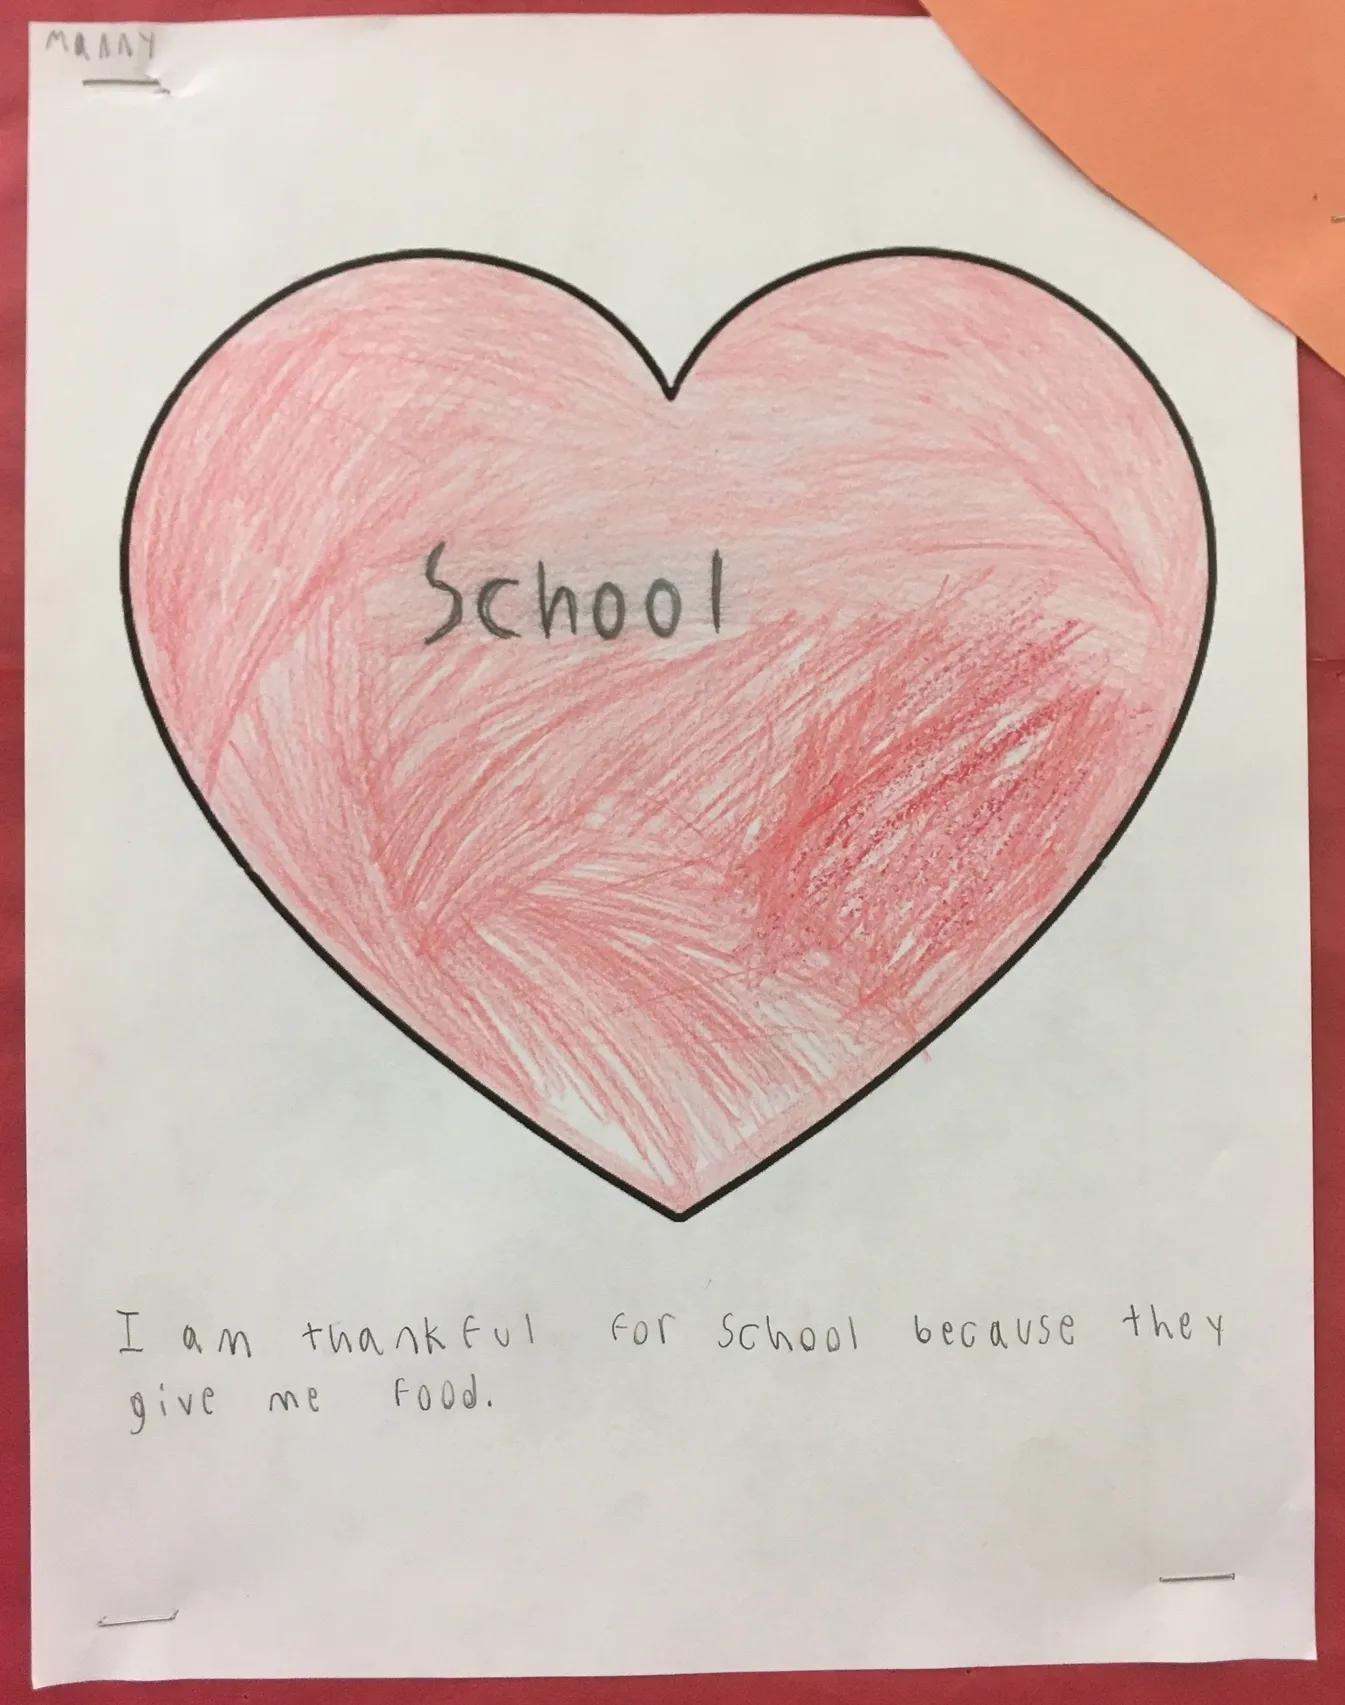 A child's illustration of a heart with the words, "I am thankful for school because they give me food."